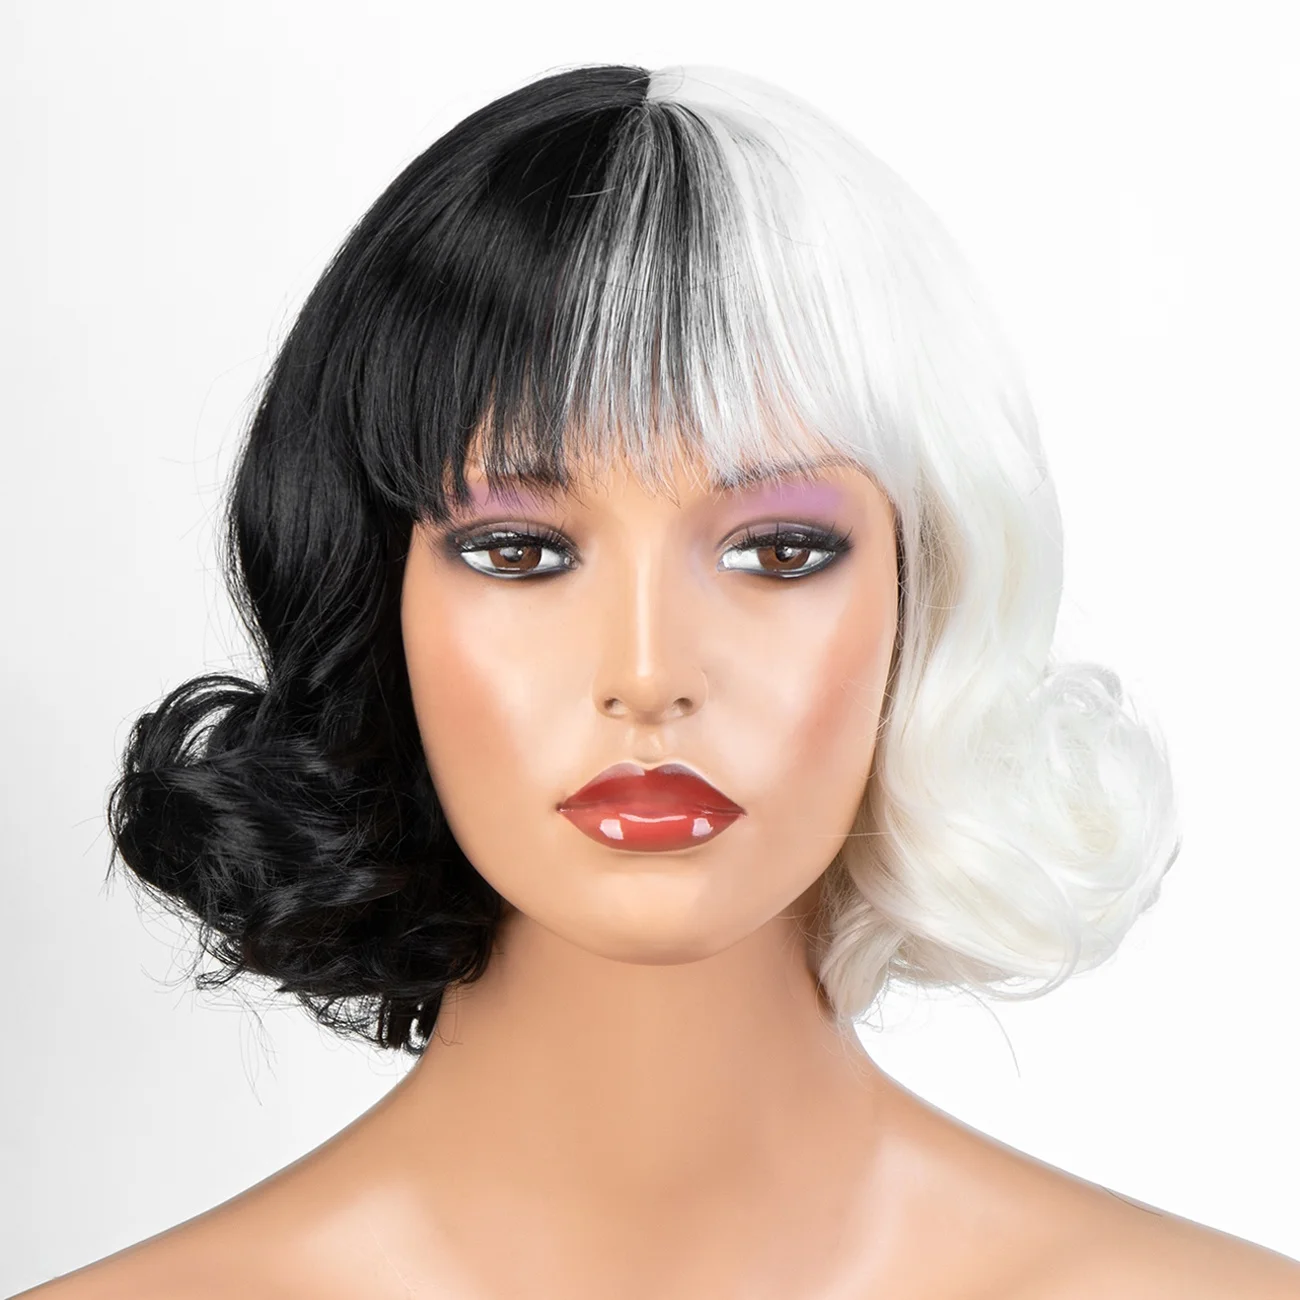 Aliblisswig Cosplay 12 Short Wavy Bob Half Black Half White Heat Resistant Fiber Hair None Lace Synthetic Wig With Full Bang Buy Synthetic Wig Synthetic Lace Front Wig Synthetic Hair Wig Product On